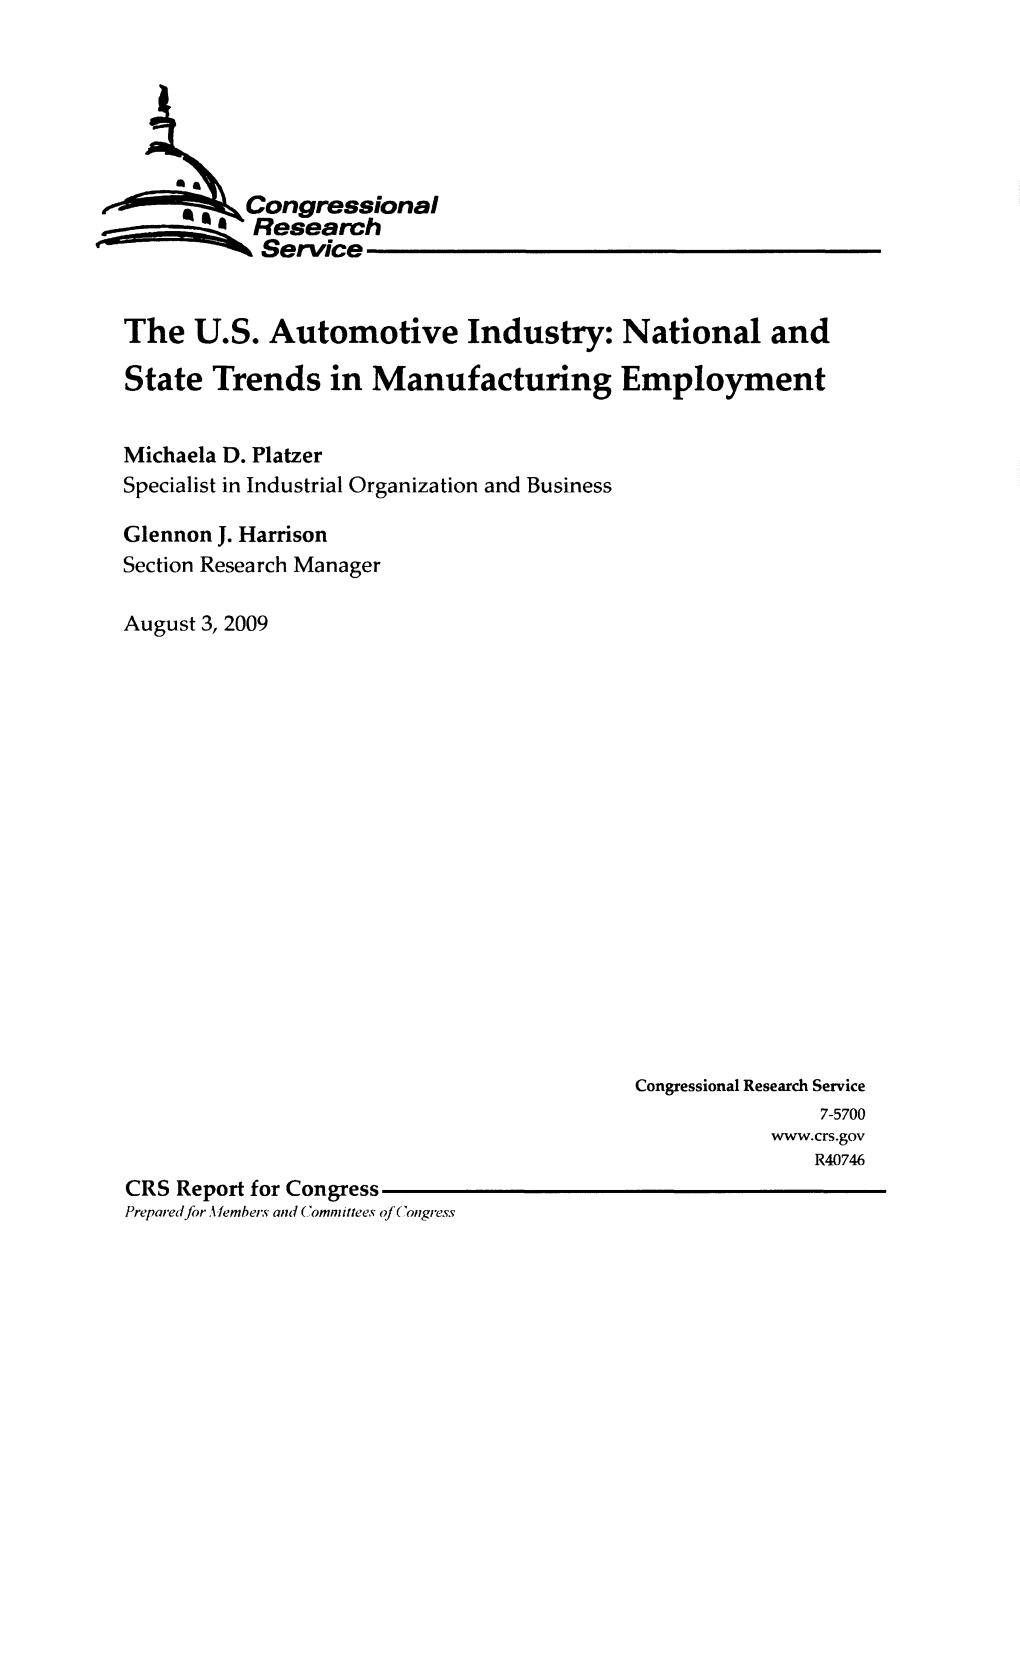 The U.S. Automotive Industry: National and State Trends in Manufacturing Employment